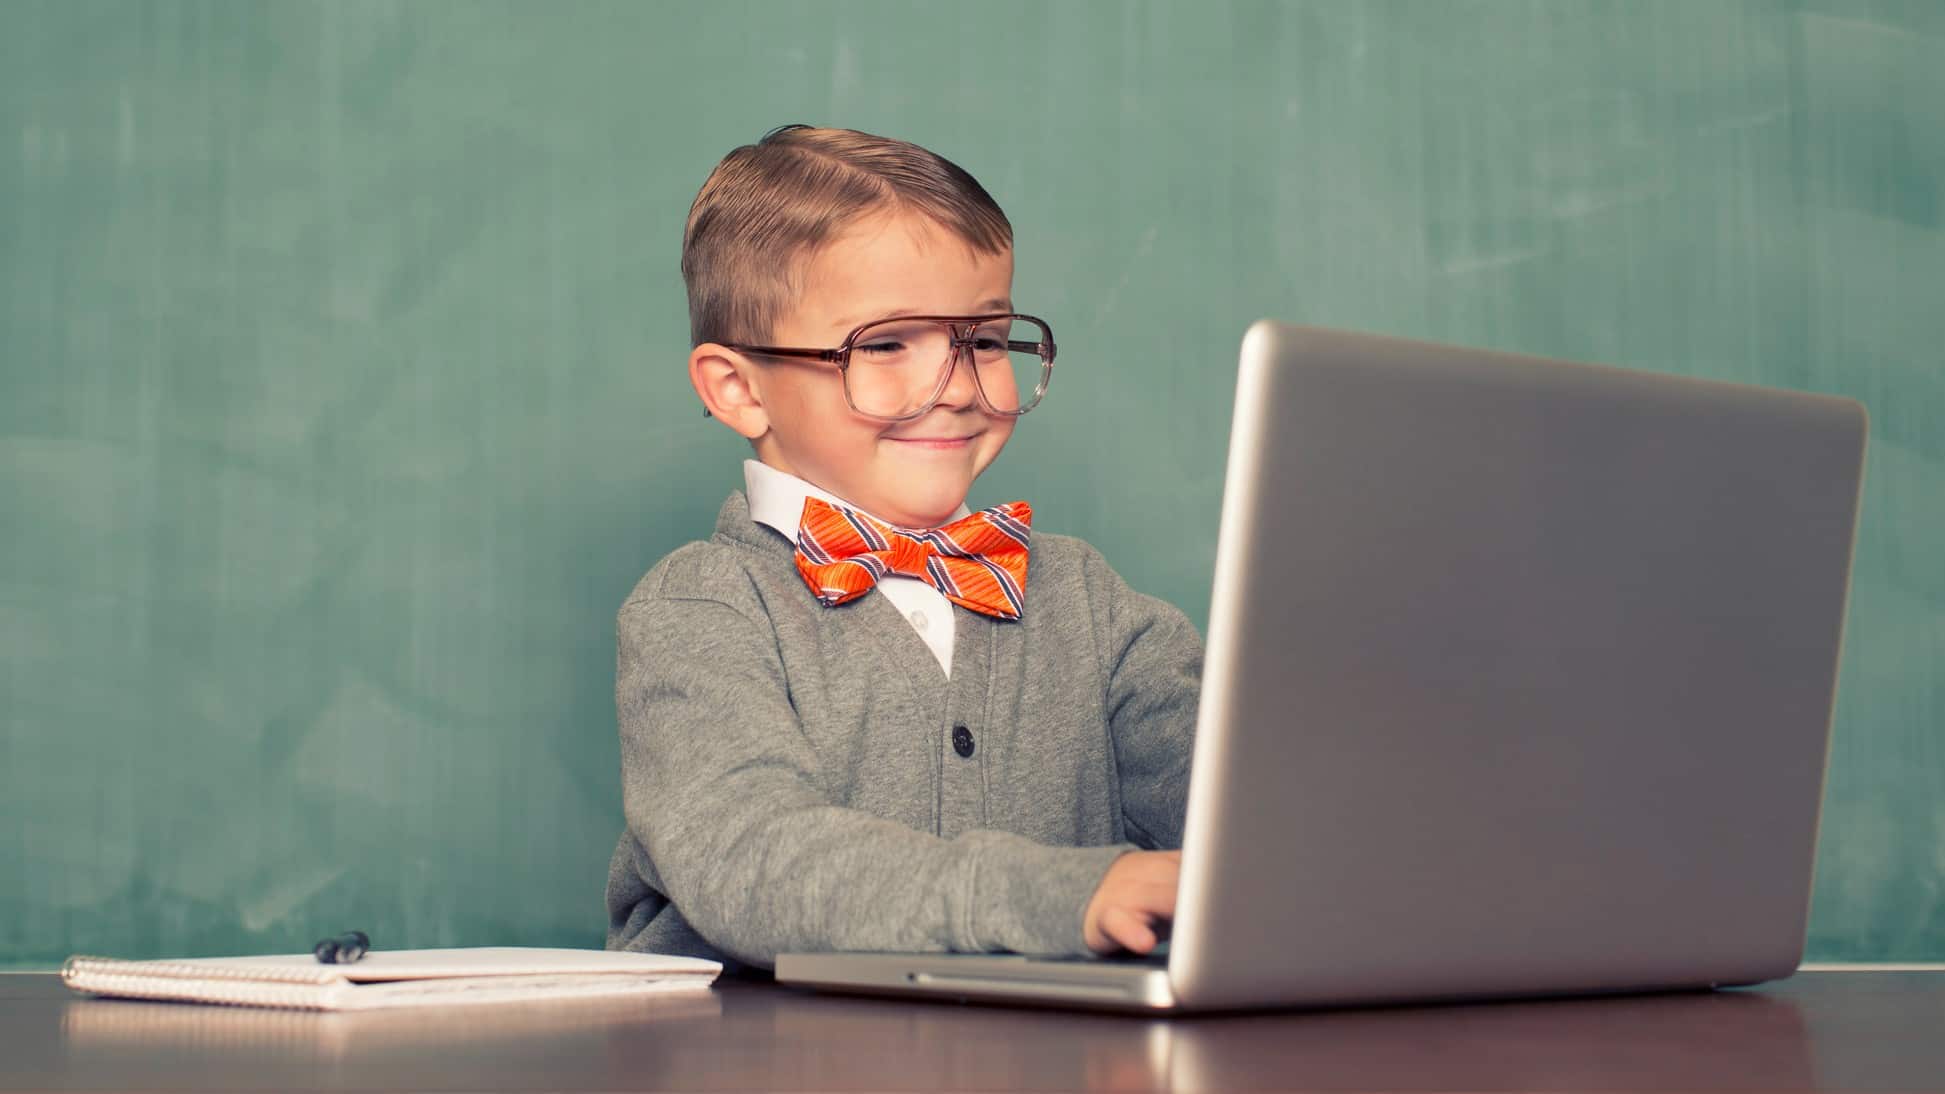 A young boy dressed in an old man-style cardigan with business shirt and bow tied wearing big spectacles smiles to himself as he sits at a laptop computer at a desk with hands on keys.